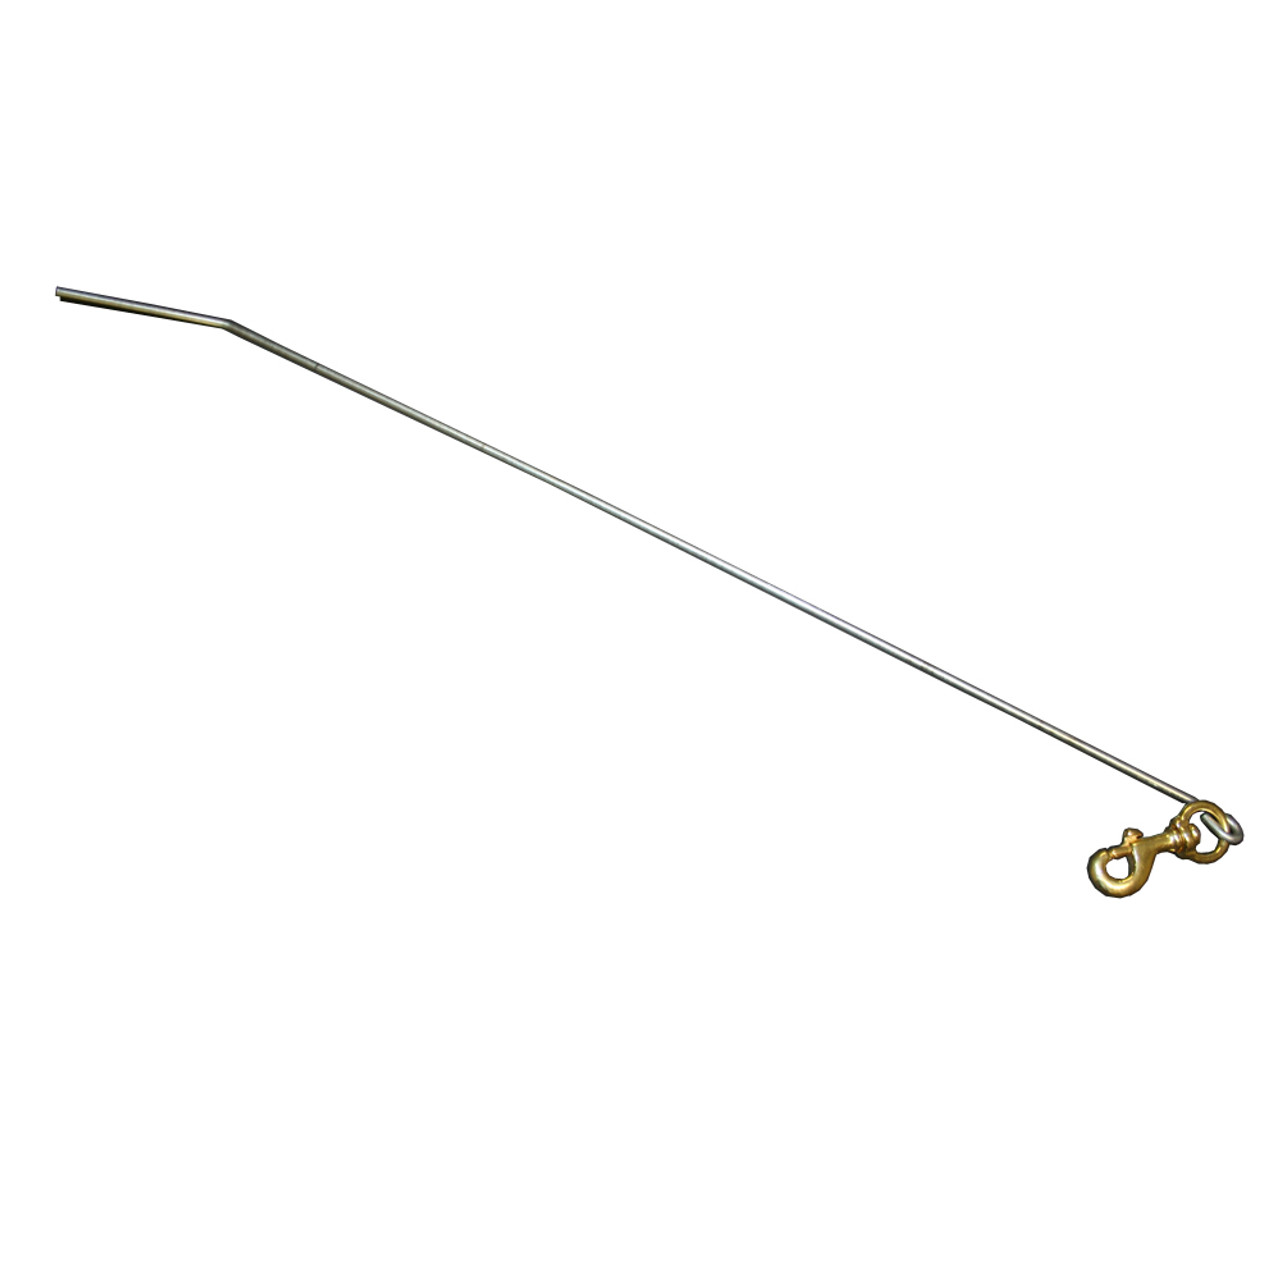 Stainless Steel Lobster Tickle Stick with Brass Bolt Snap Clip, 28inch